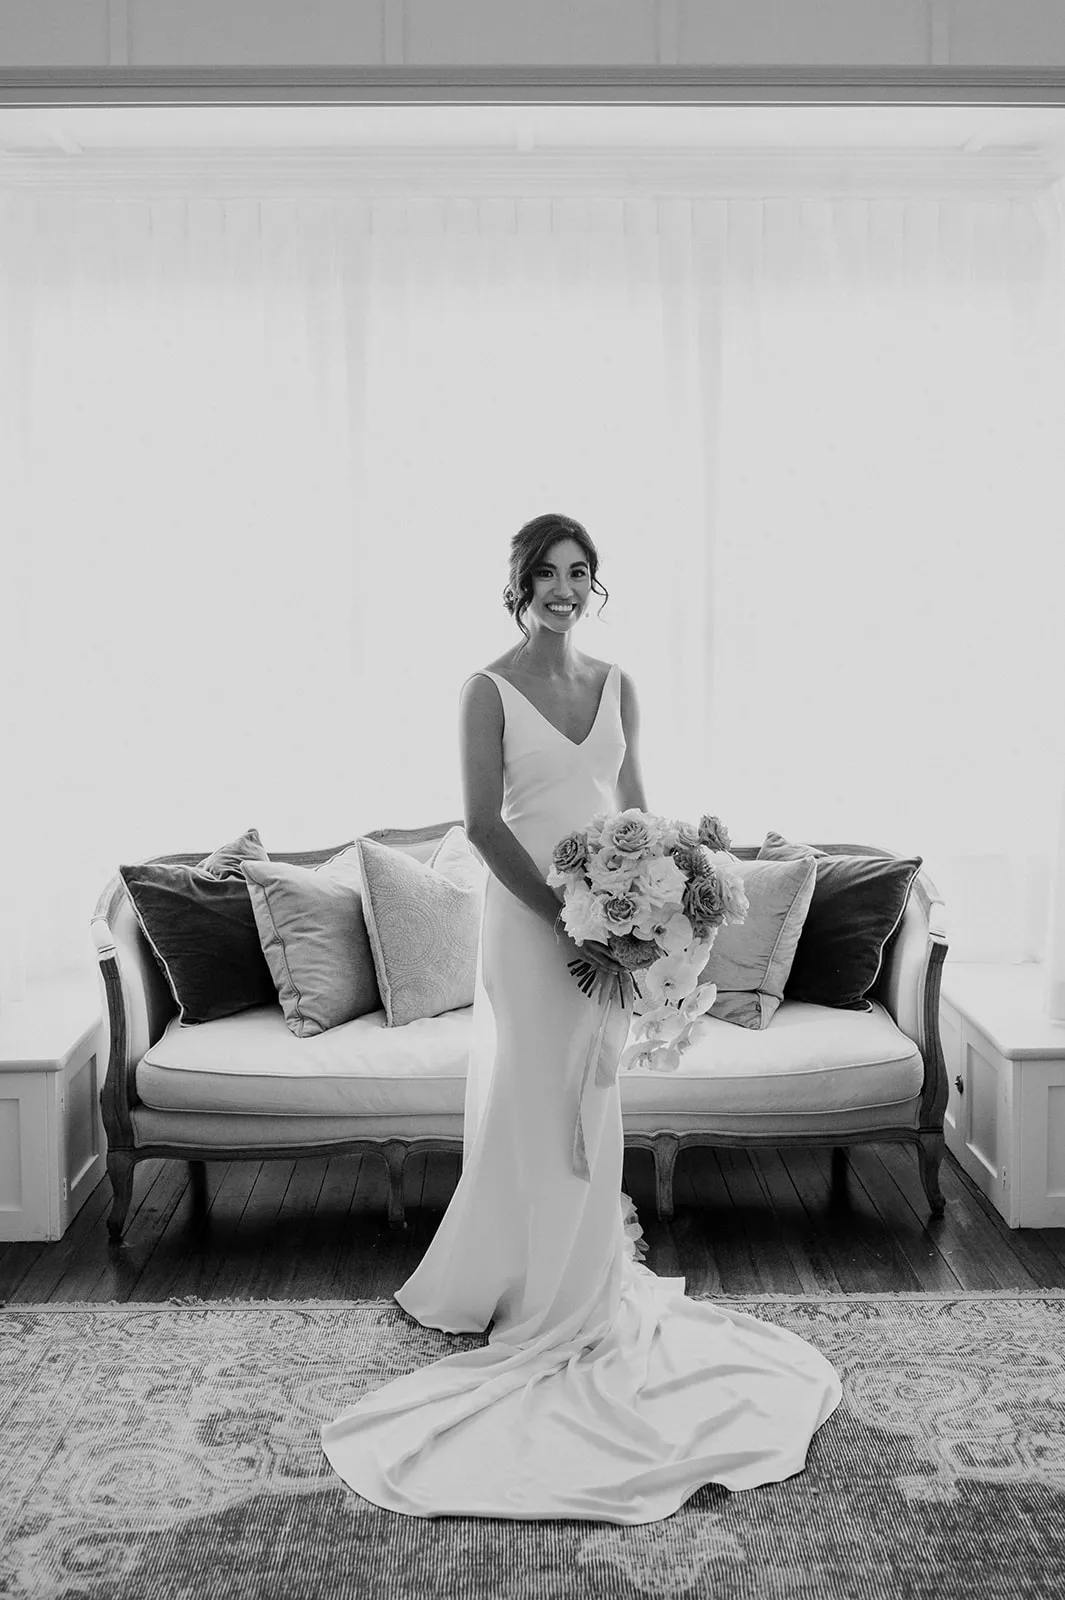 A bride in a flowing wedding gown stands in front of a sofa with multiple pillows. She holds a large bouquet of flowers, and the room is elegantly decorated with curtains and a patterned rug. The black and white photo captures her poised and smiling.